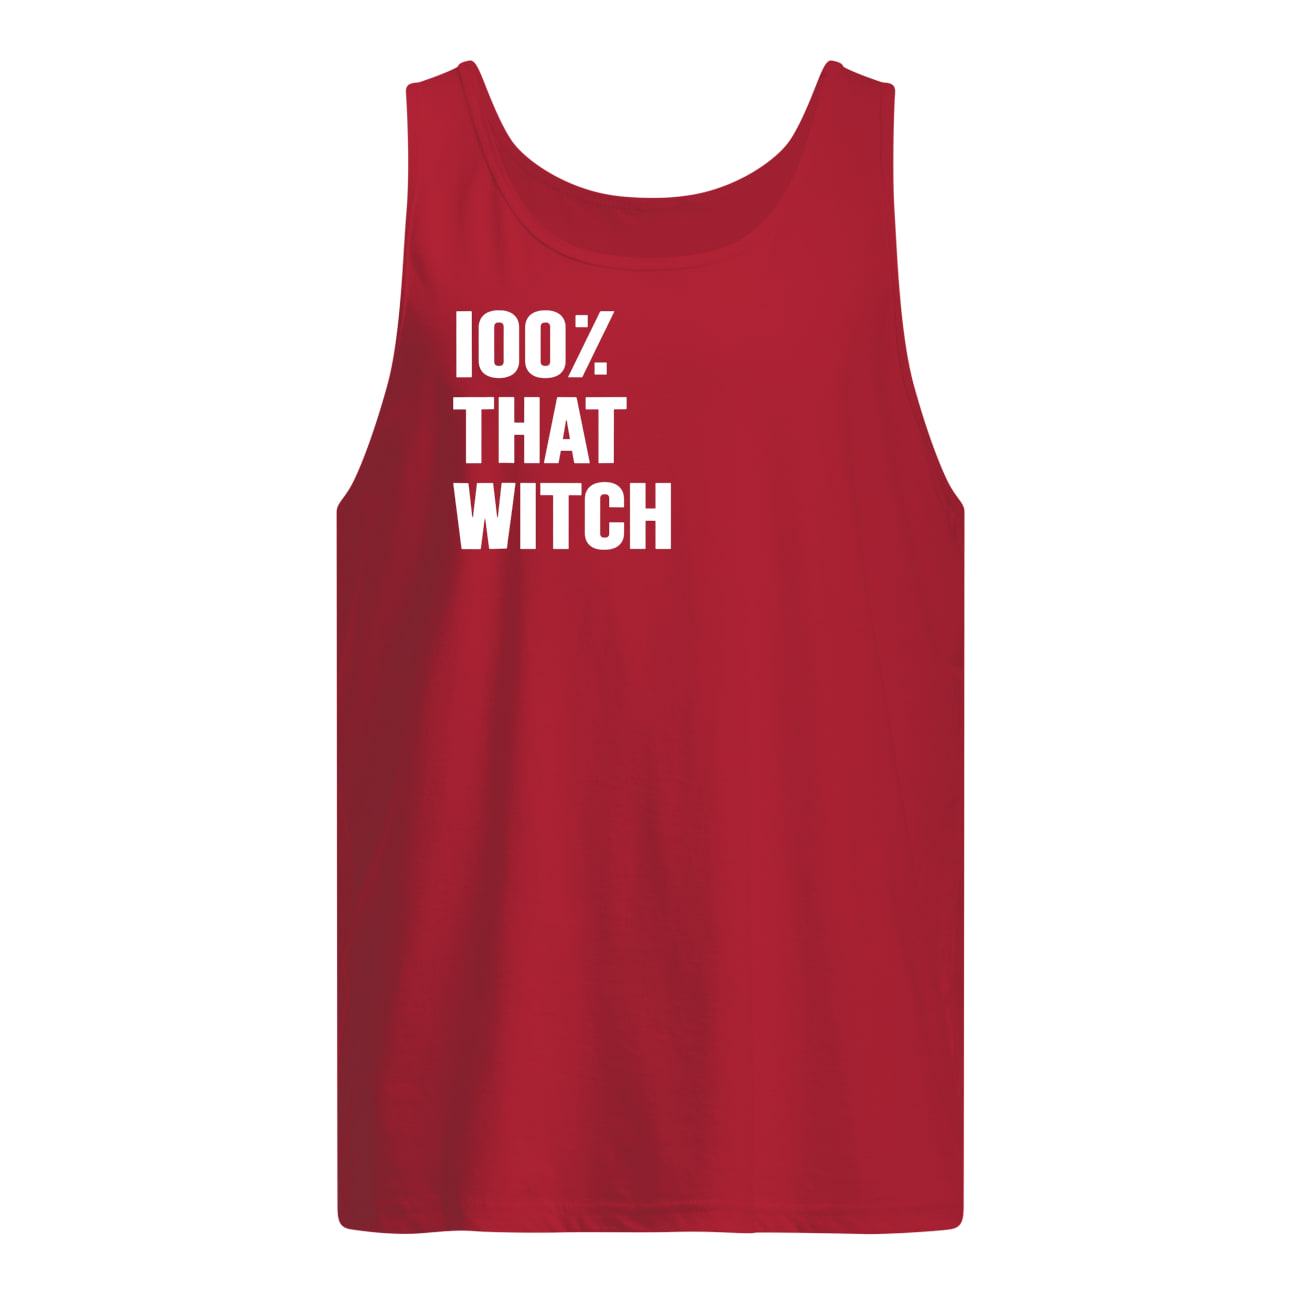 100% that witch tank top